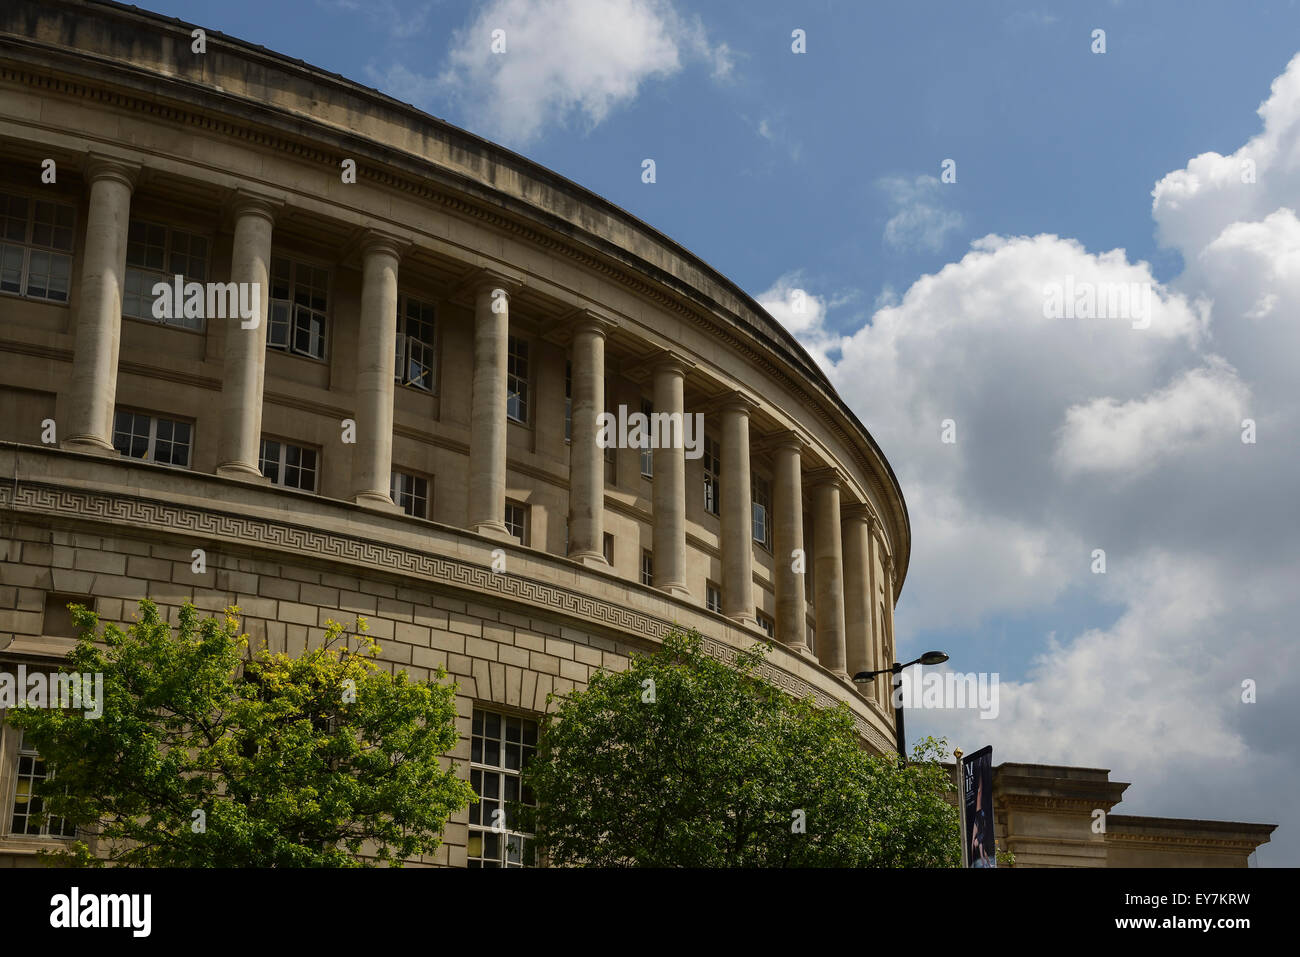 A close up detail of the exterior of Manchester Central Library in Manchester city centre UK Stock Photo